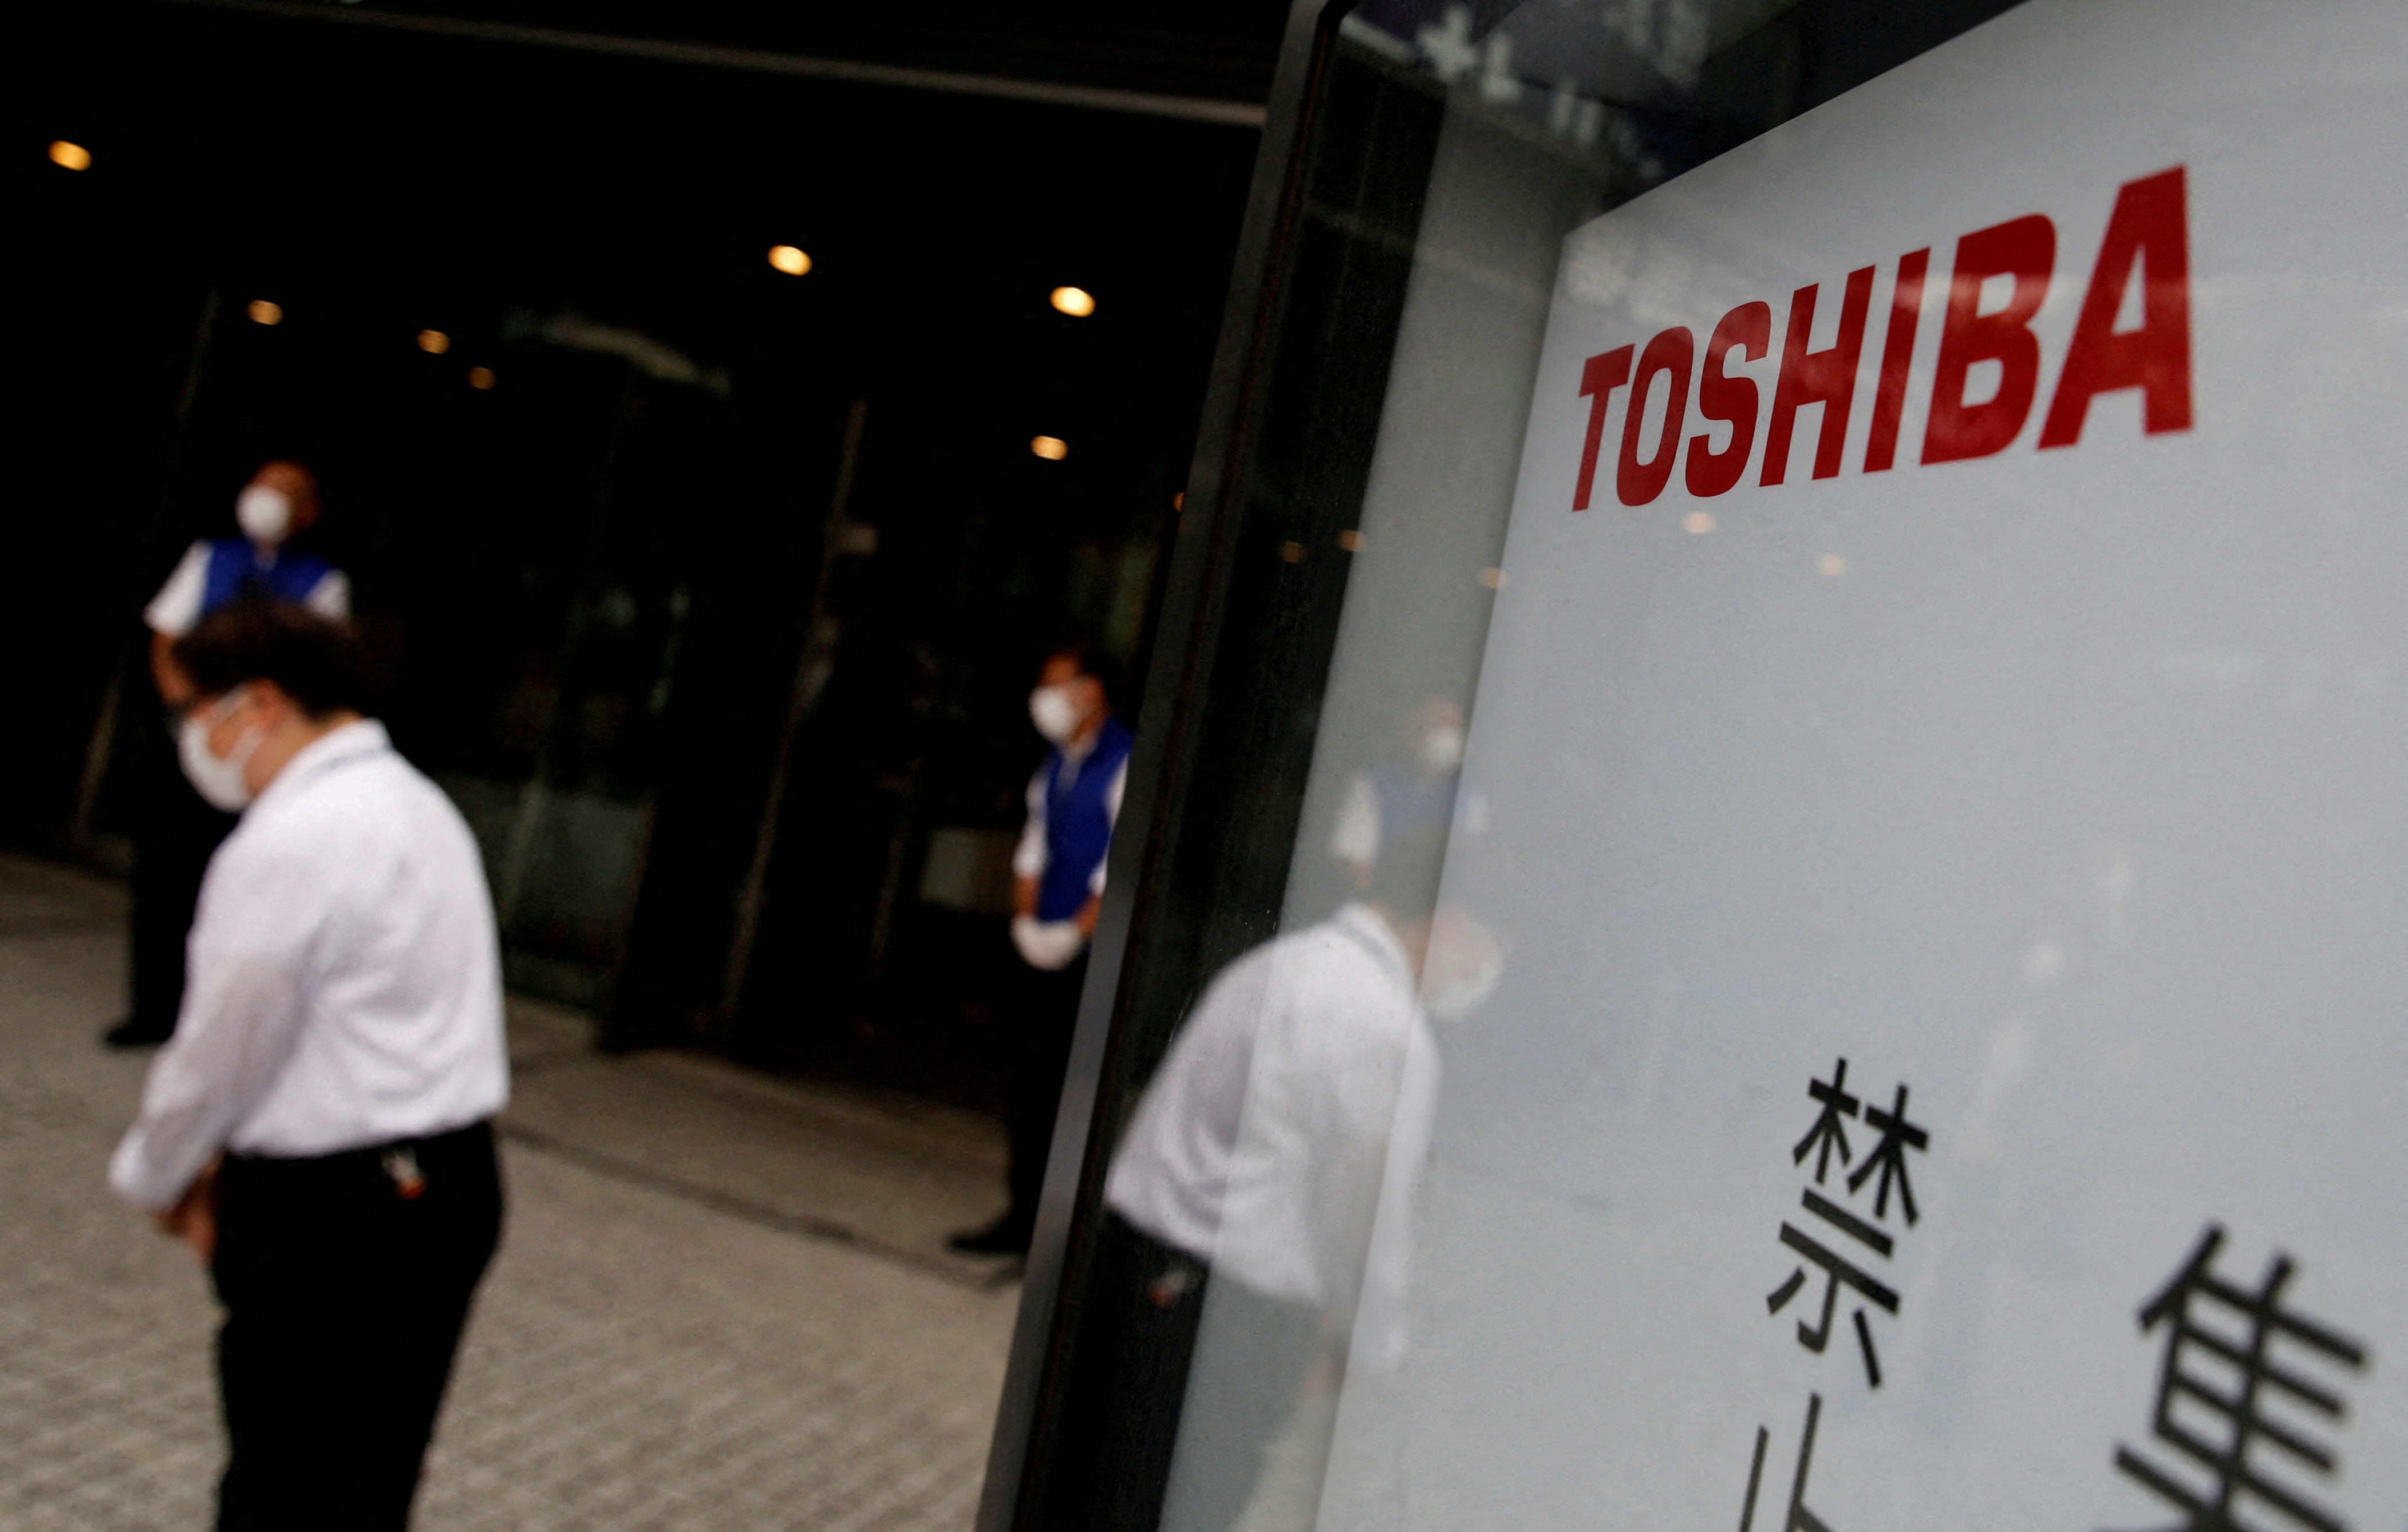 Toshiba Corp's 2021 annual general meeting with its shareholders in Tokyo